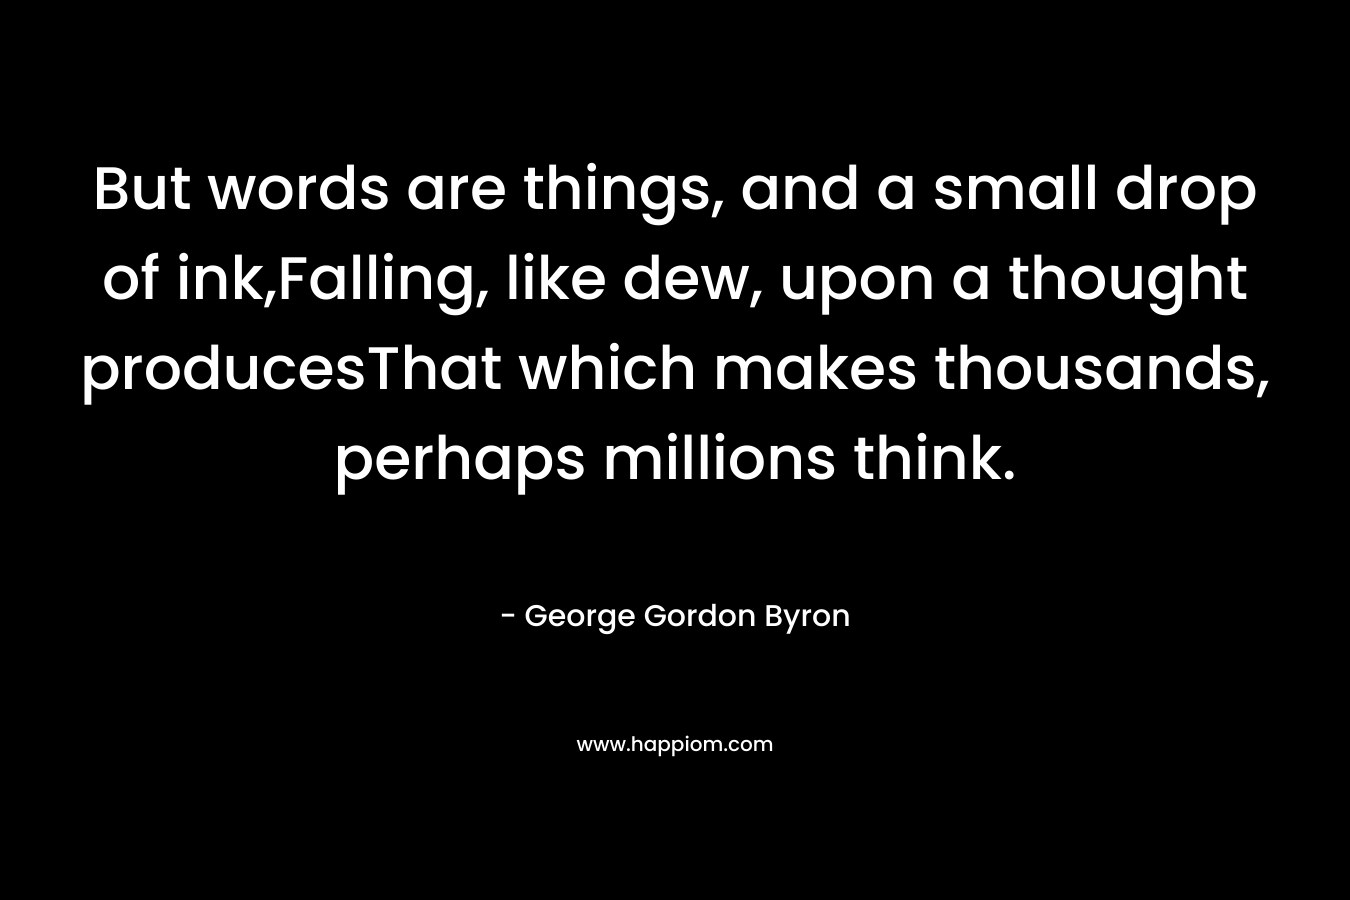 But words are things, and a small drop of ink,Falling, like dew, upon a thought producesThat which makes thousands, perhaps millions think. – George Gordon Byron